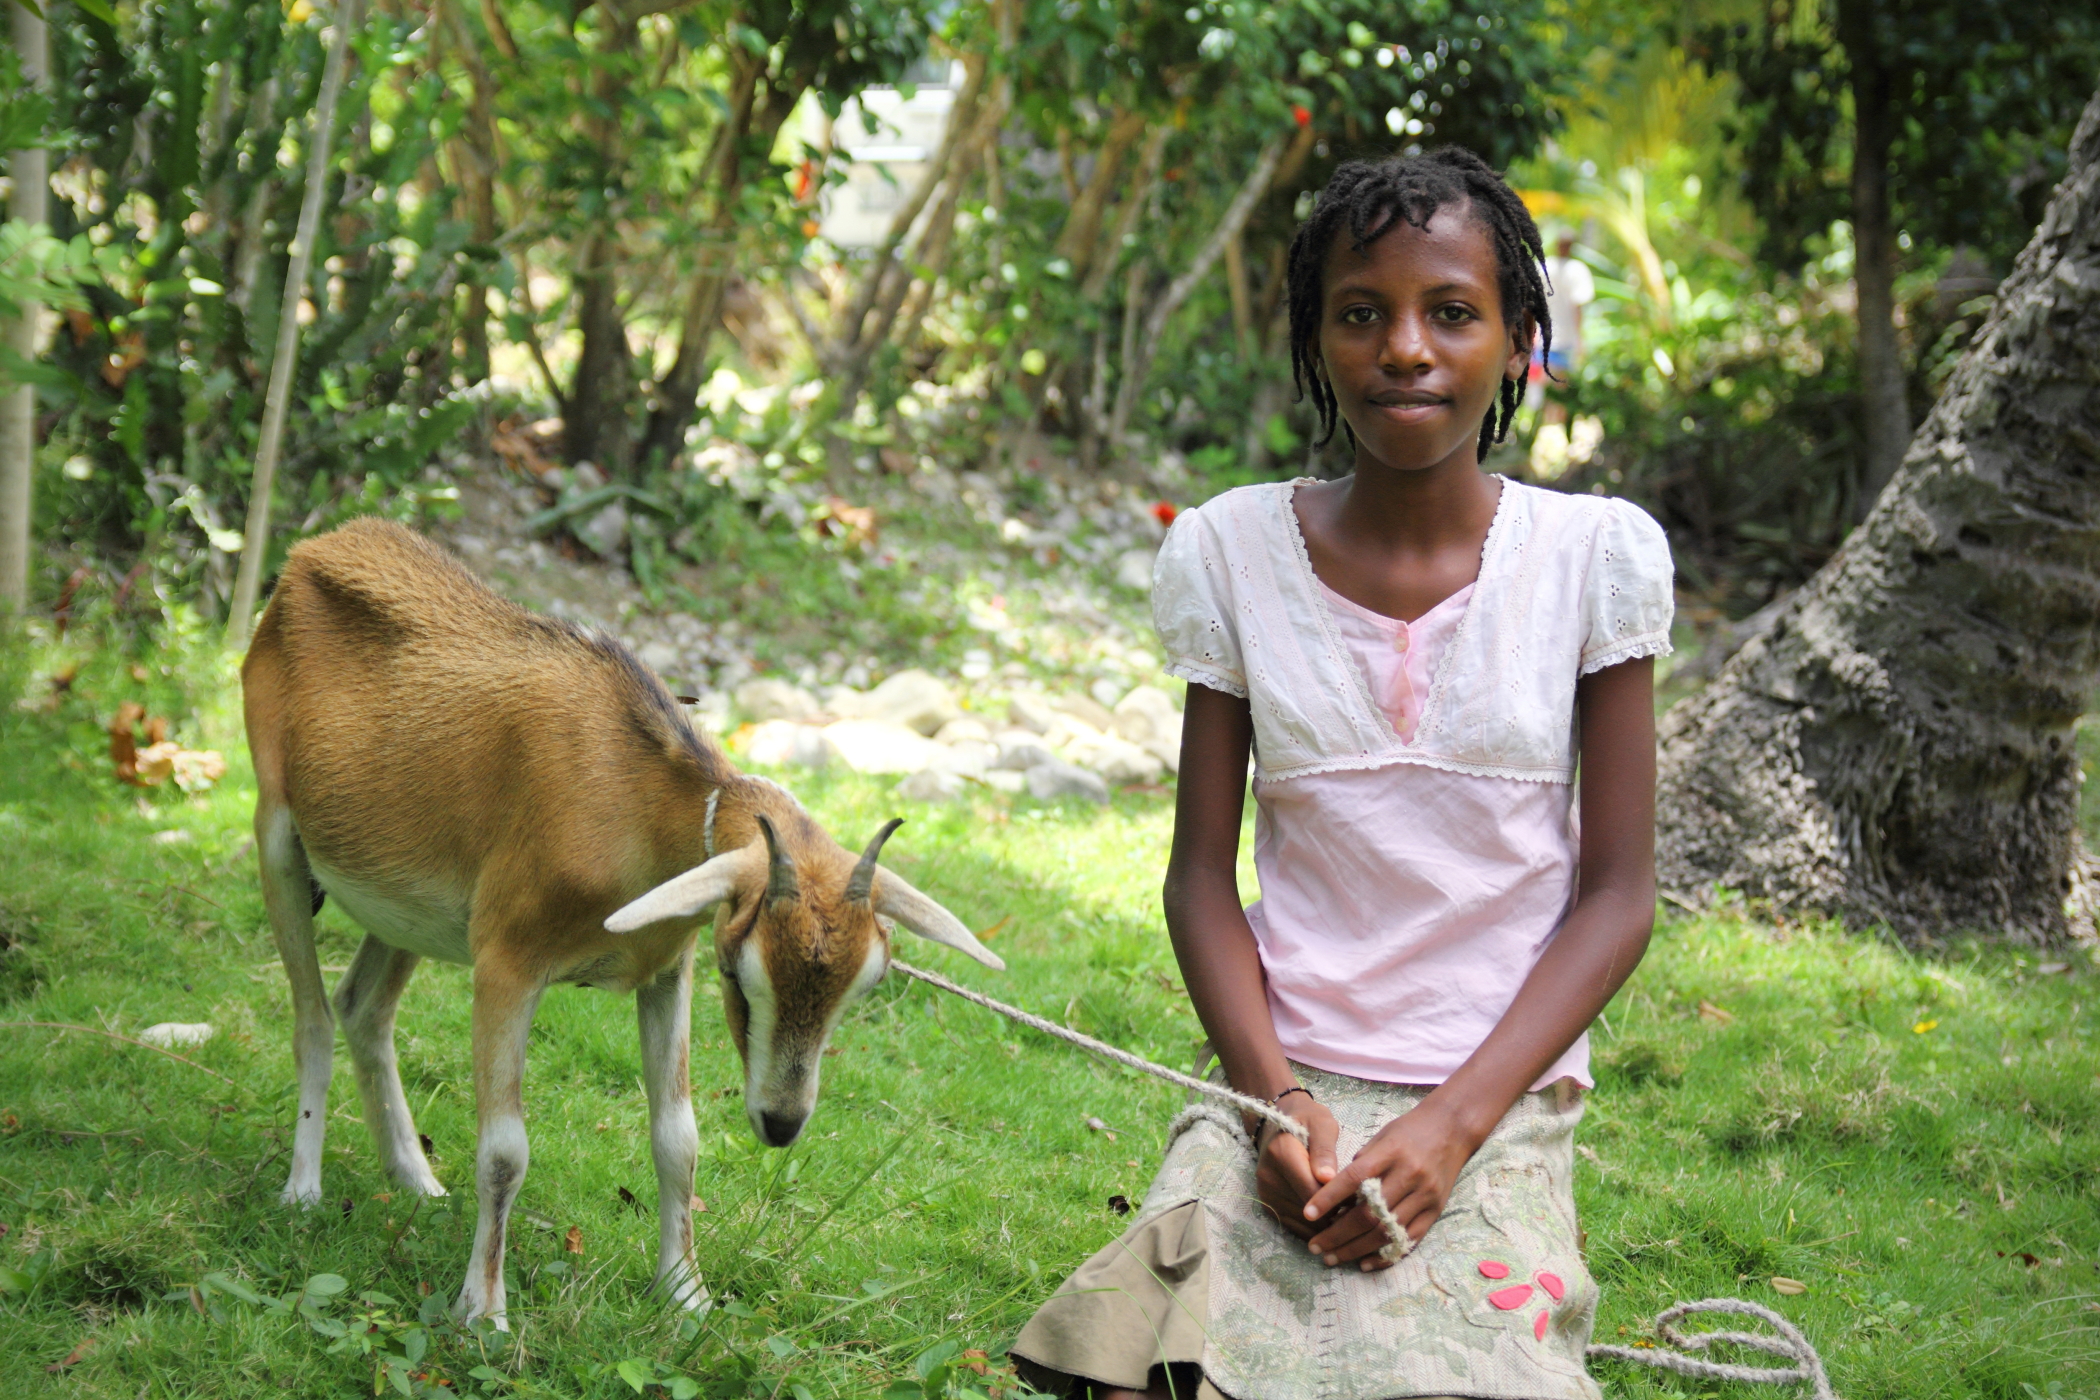 Goats And Girls Education A Baton For Life Humanitarian Aid And Relief